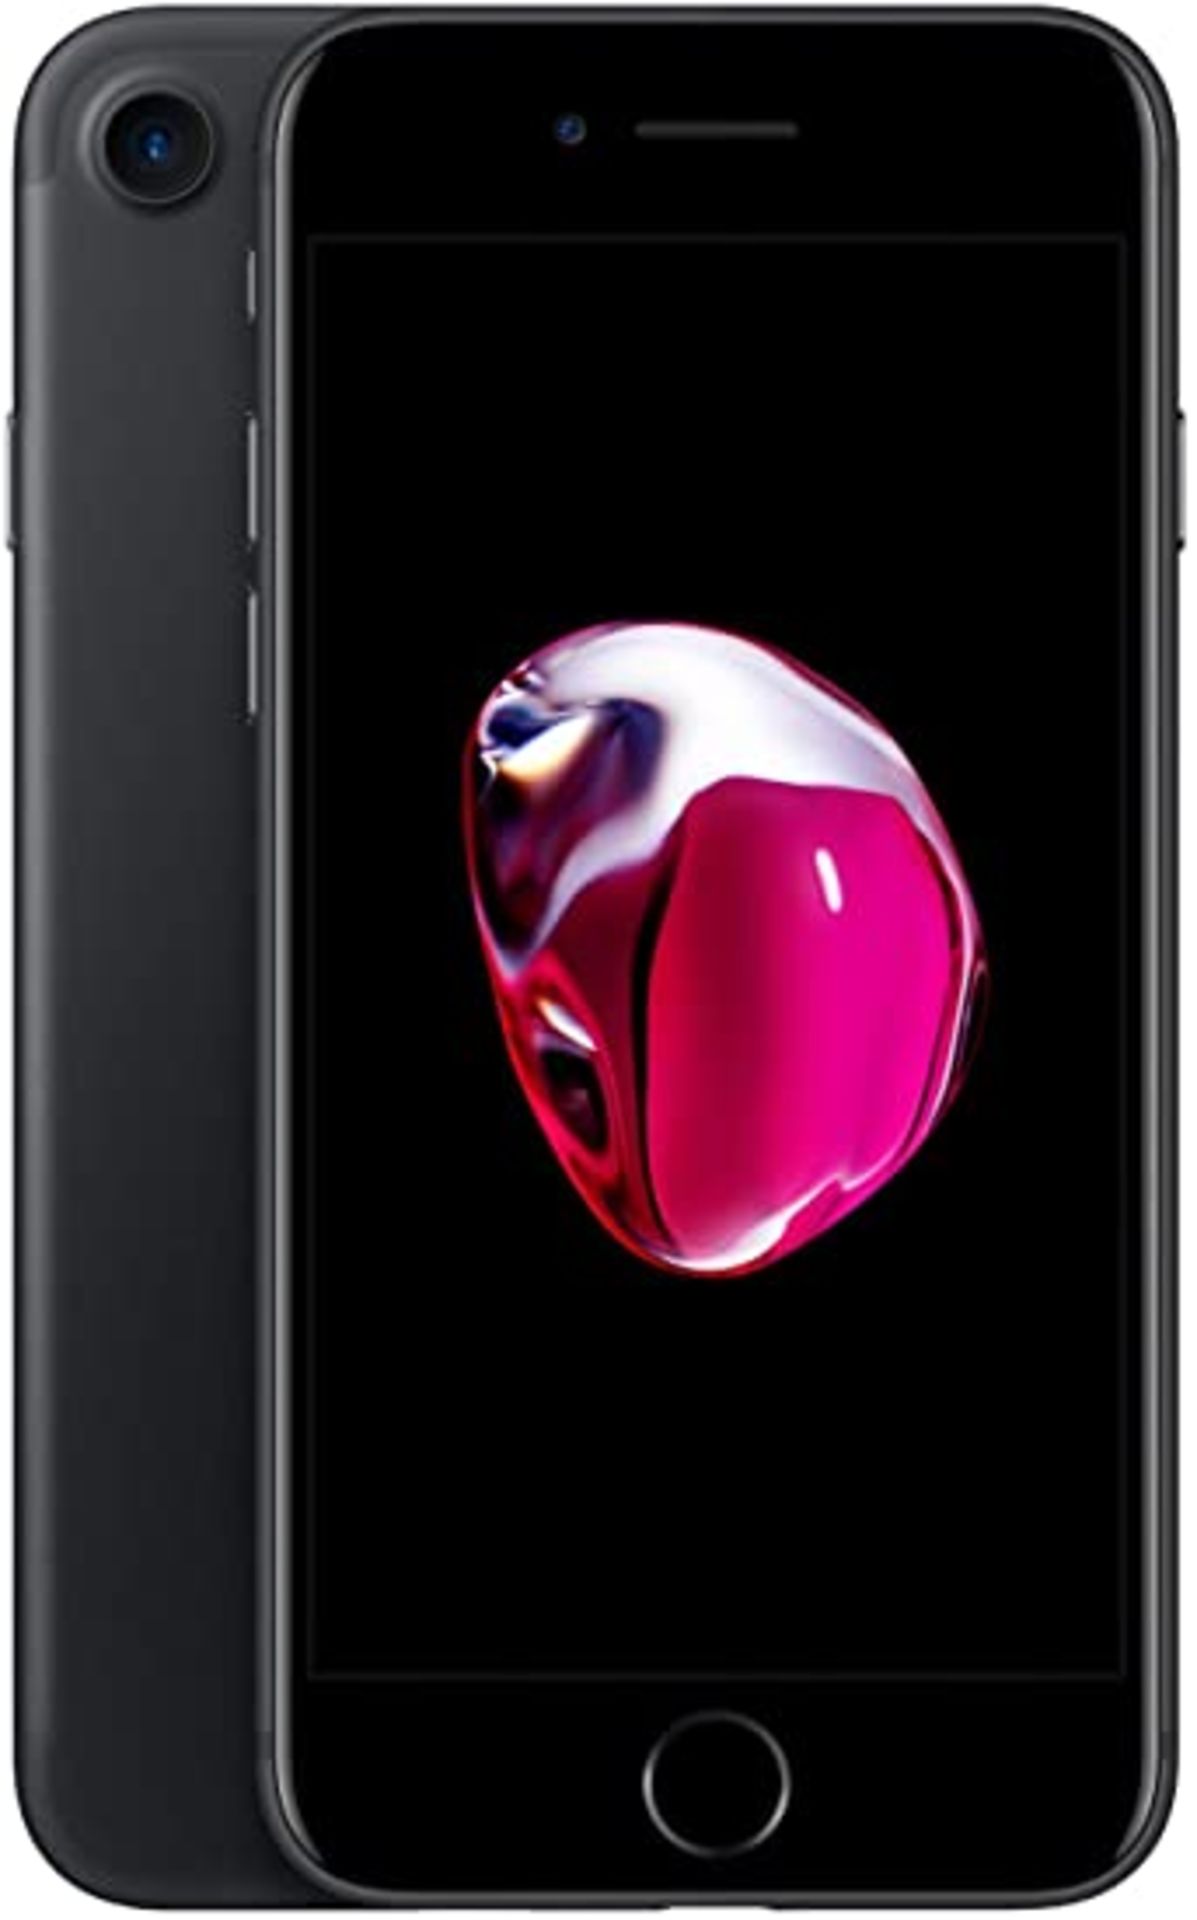 + VAT Grade A Apple iPhone 7 Mobile Phone - 256gb - Black/White/Gold/Red/Pink - Item Is Available